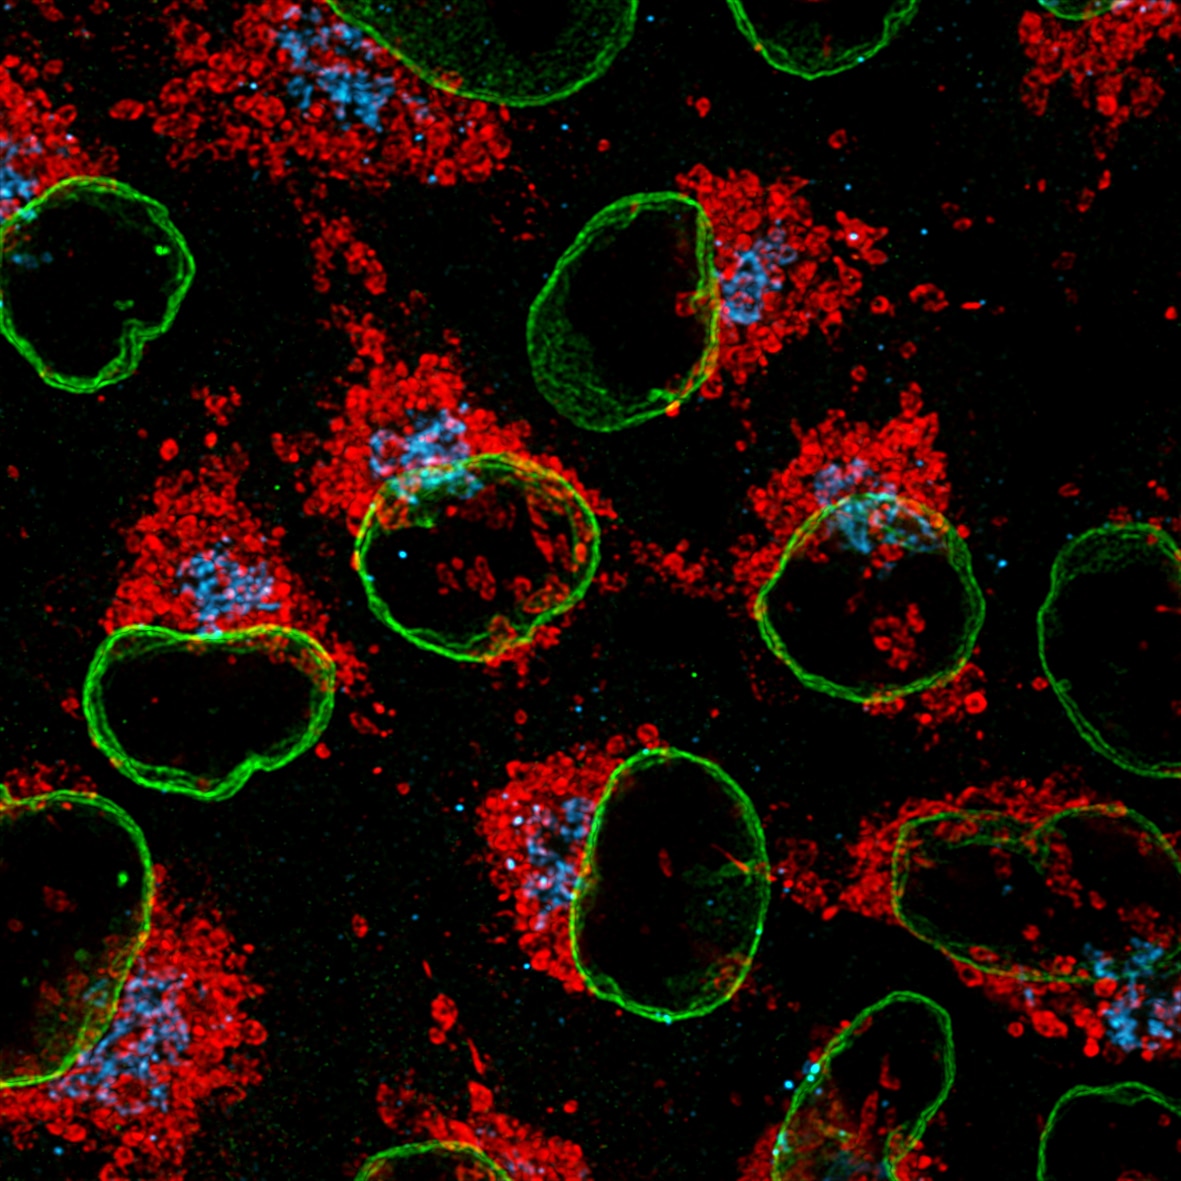 Immunofluorescence of HeLa: PFA-fixed HeLa cells were stained with anti-Lamin B1 antibody (66095-1-Ig) labeled with FlexAble CoraLite® 488 Kit (KFA021, green), anti-HSP60 (66041-1-Ig) labeled with FlexAble CoraLite® Plus 555 Kit (KFA022, red) and
                                                                                         anti-GORASP2 antibody (66627-1-Ig) labeled with FlexAble CoraLite® Plus 647 Kit (KFA023, cyan). Confocal images were acquired with a 100x oil objective and post-processed. Images were recorded at the Core Facility Bioimaging at the Biomedical Center, LMU Munich.